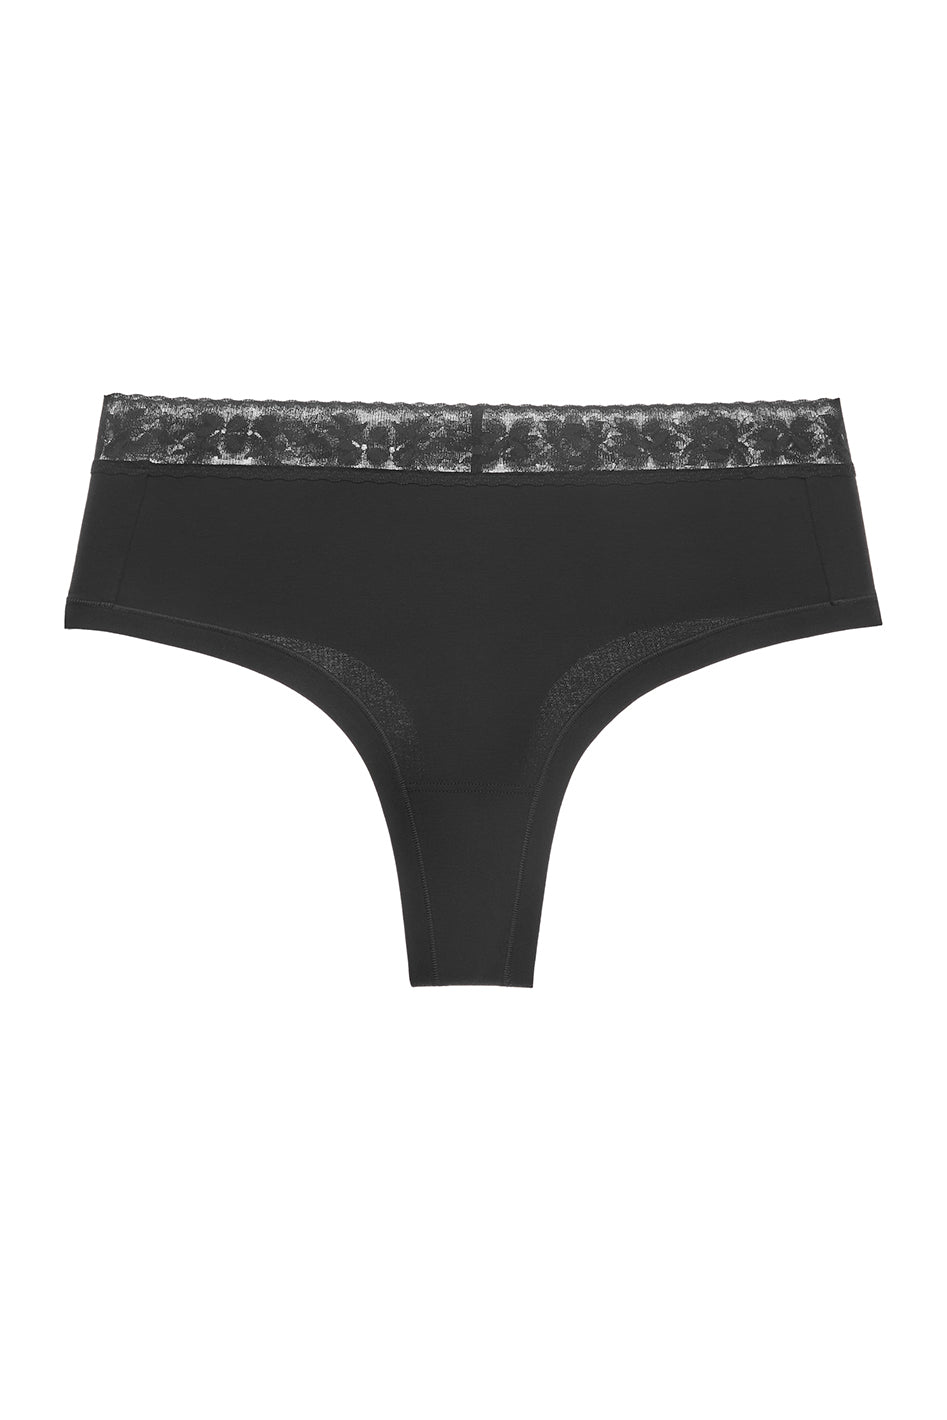 Whisper Lace Cotton-Modal Mid-Rise Thong - Understance